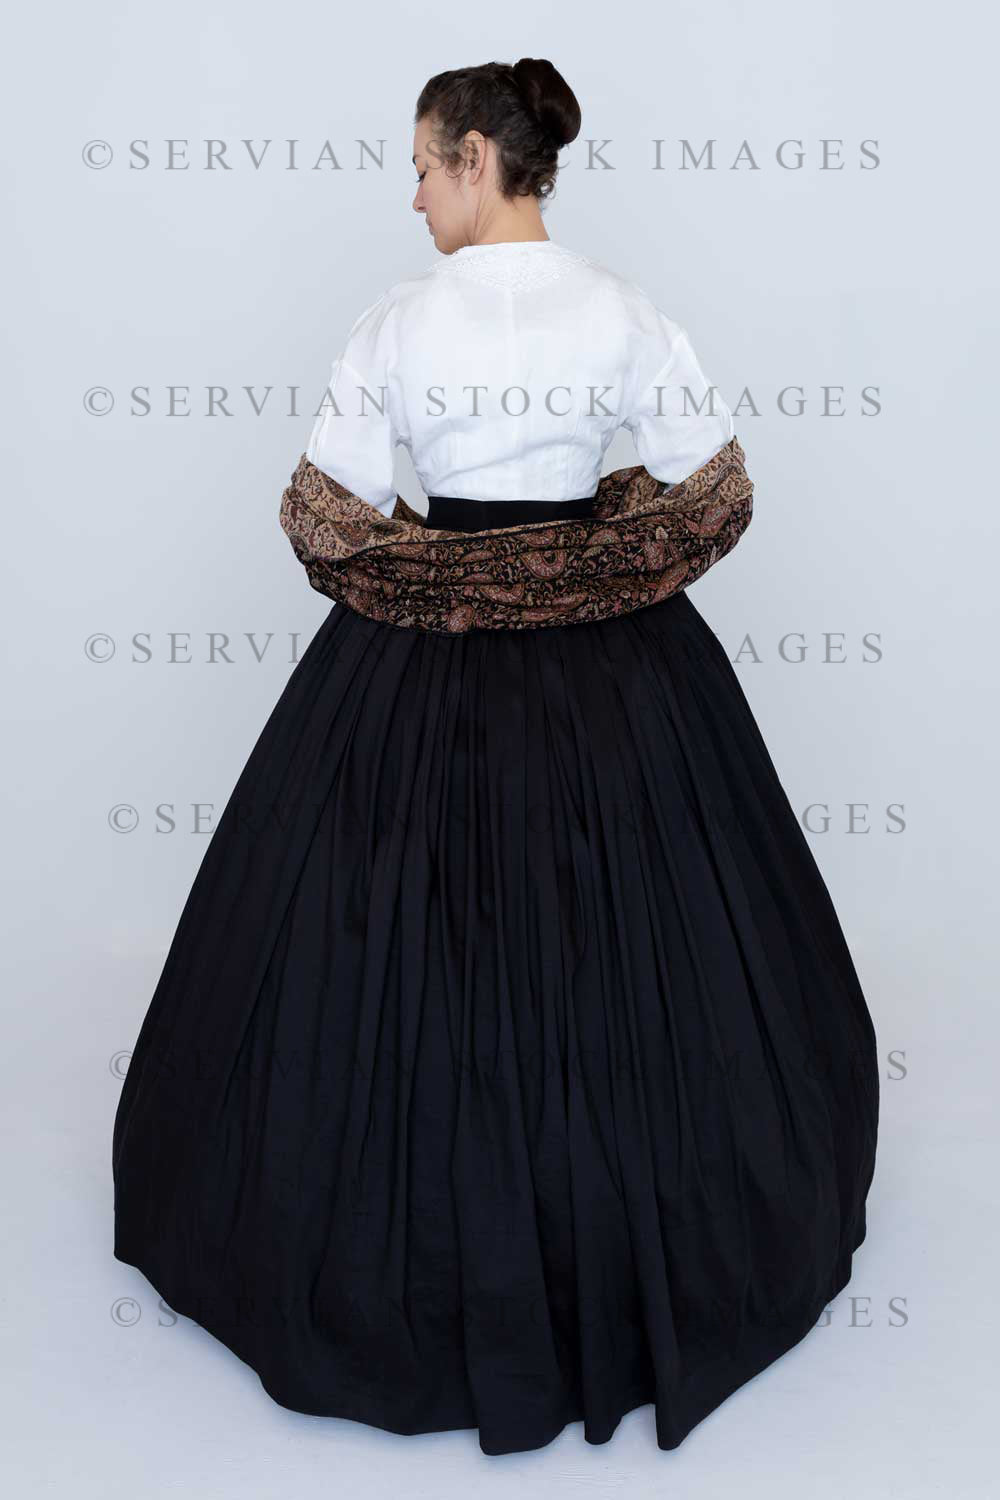 Victorian woman wearing a Garibaldi blouse, paisley shawl and full skirt against a white backdrop (Emma 2356)